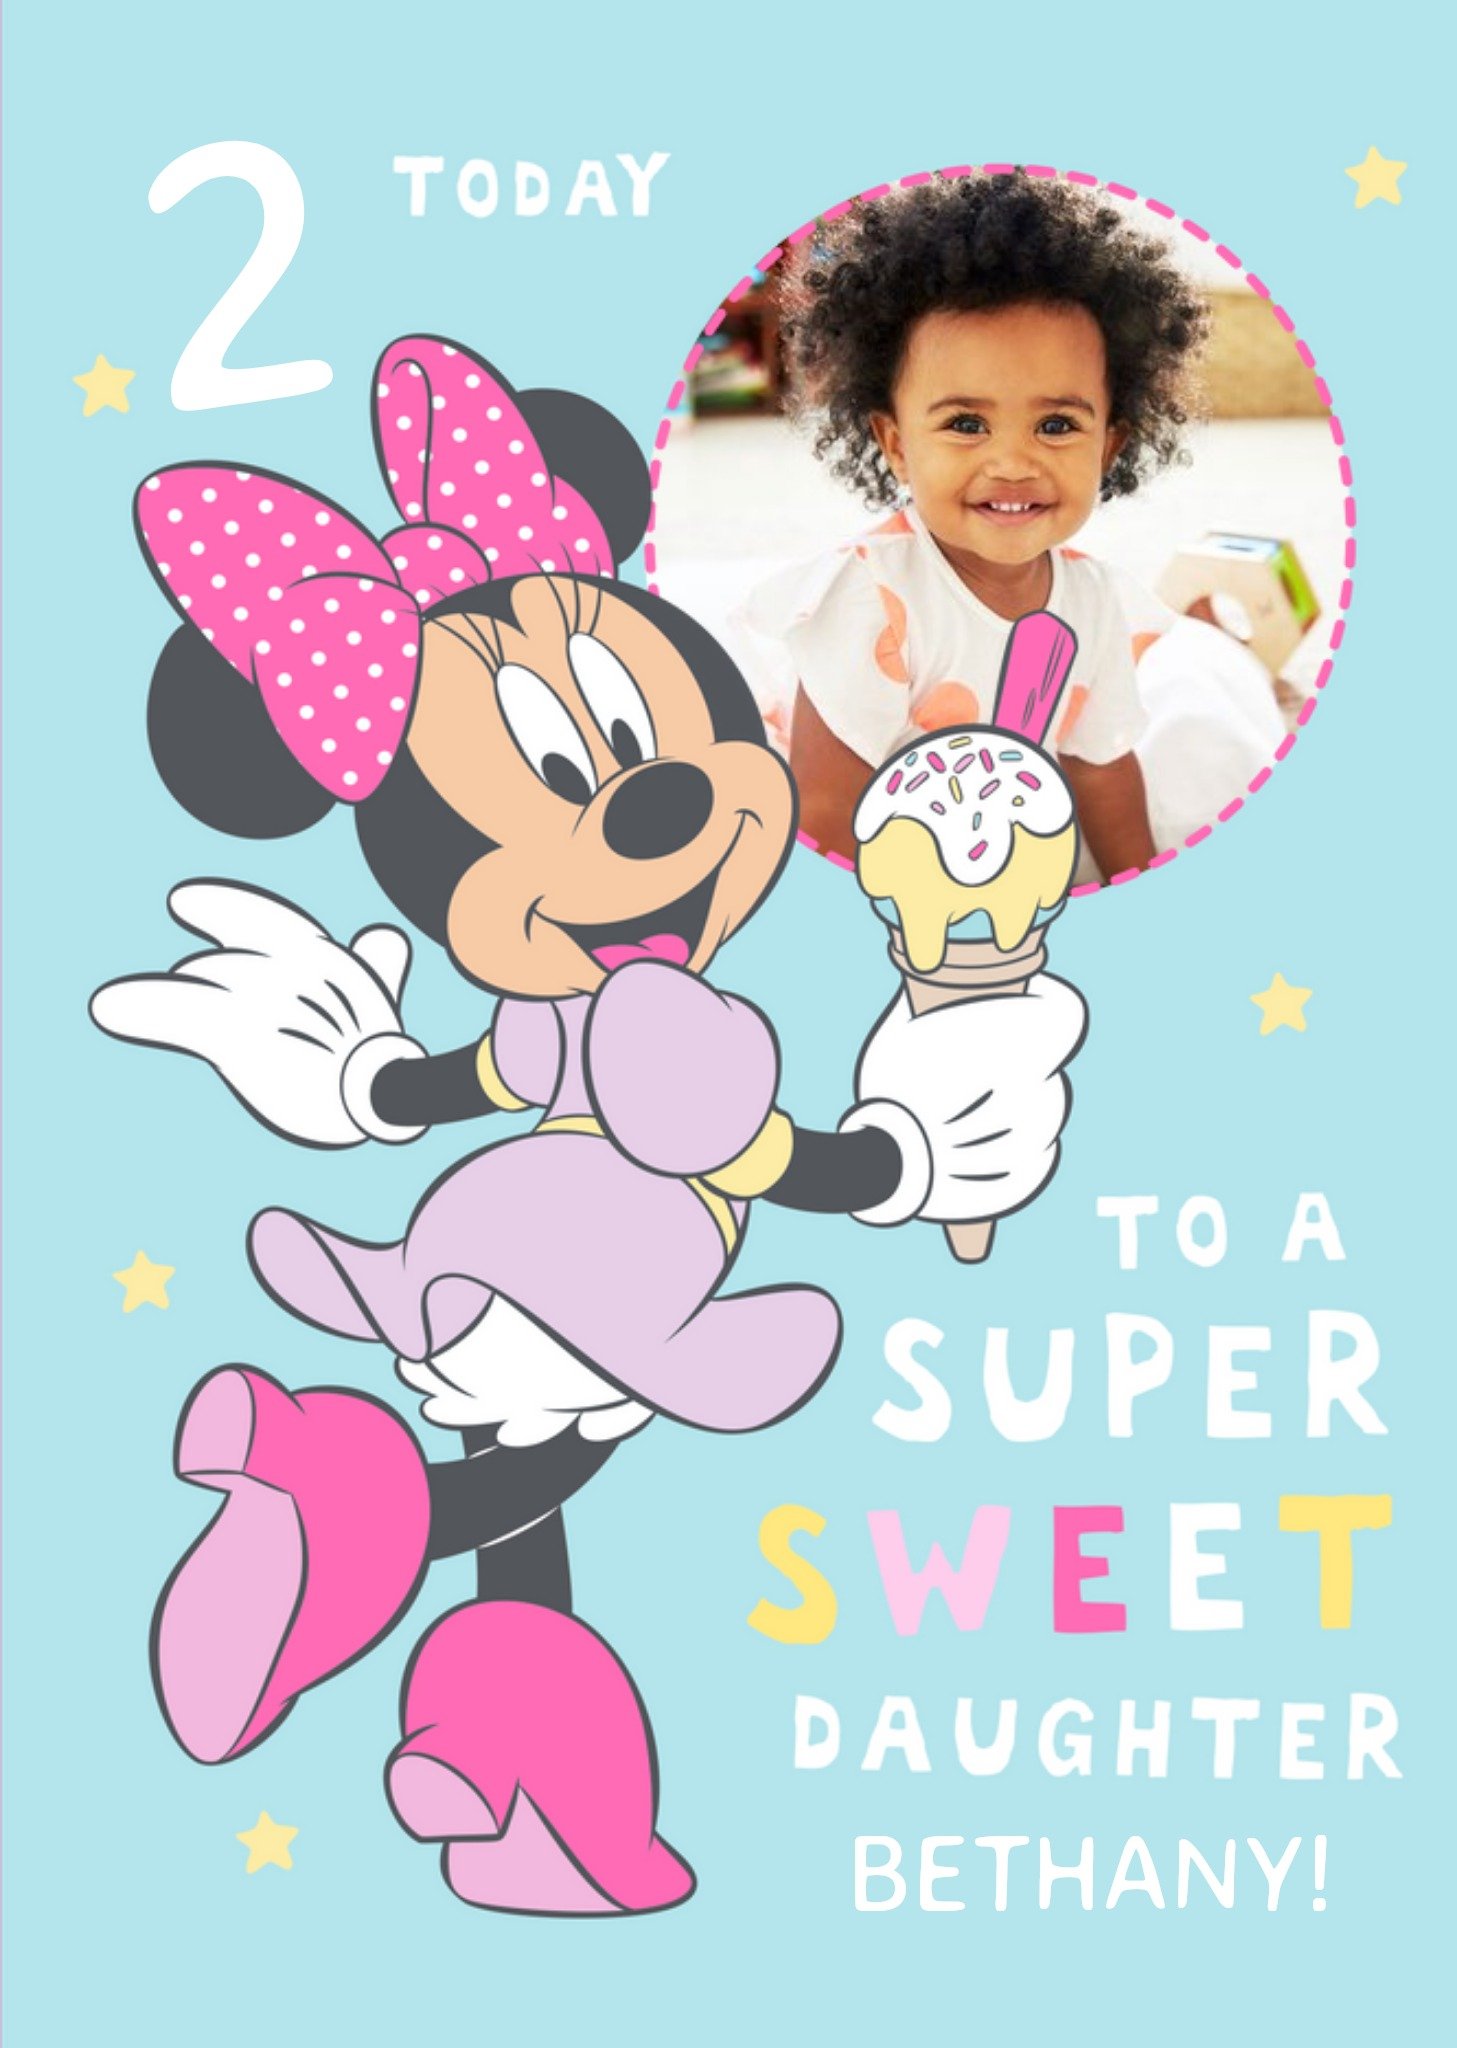 Disney Minnie Mouse Photo Upload To A Super Sweet Daughter 2 Today, Large Card